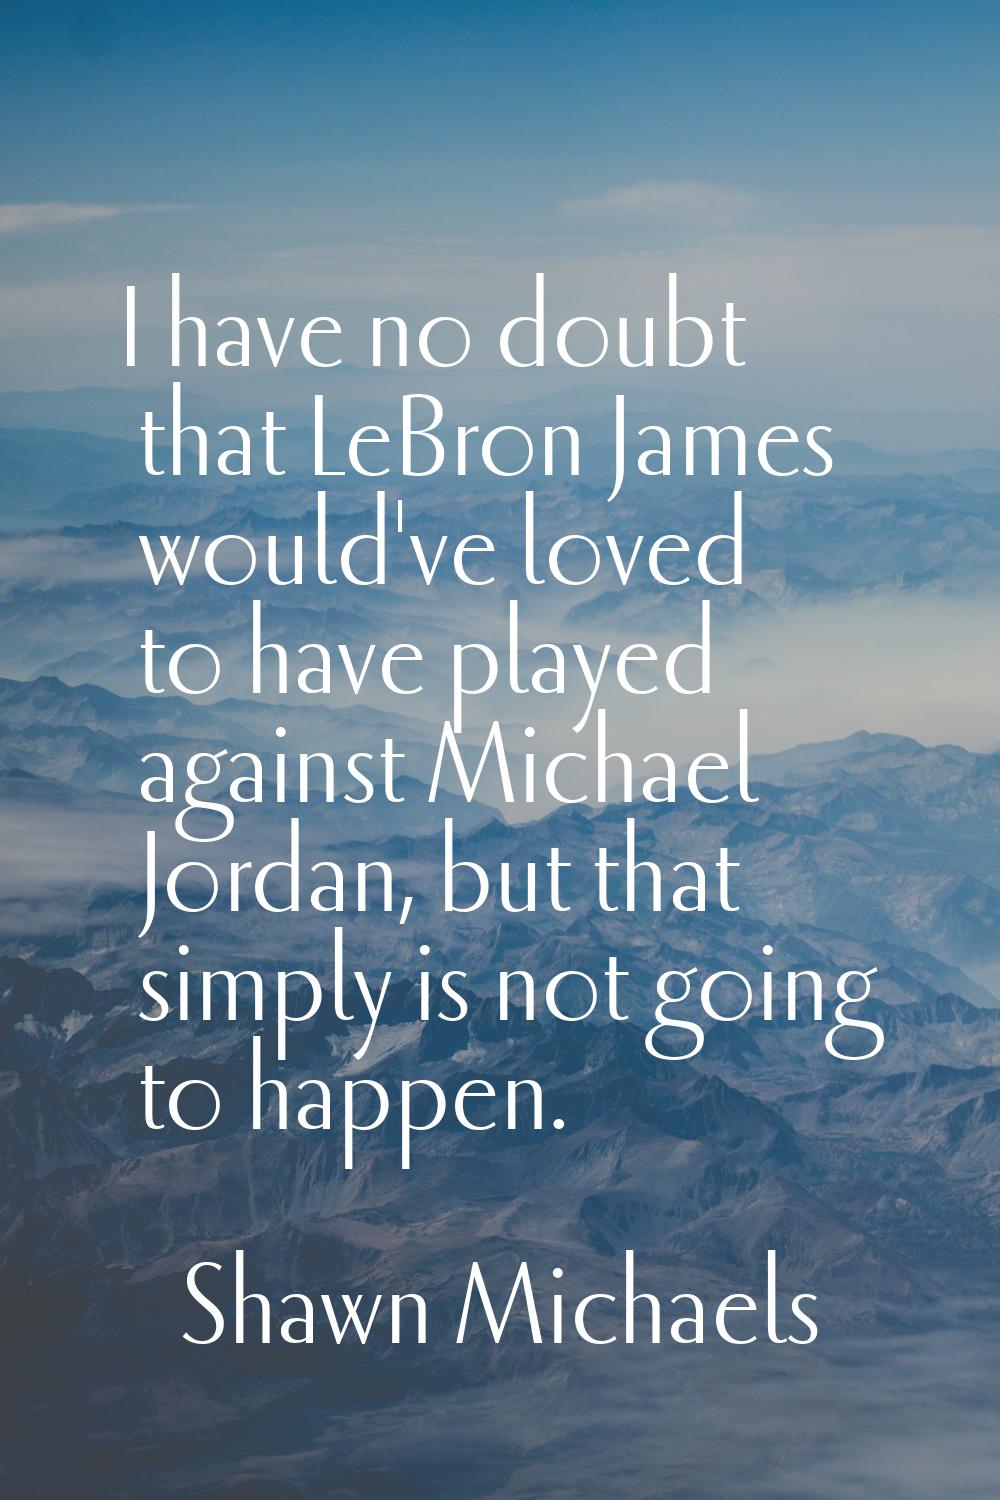 I have no doubt that LeBron James would've loved to have played against Michael Jordan, but that si